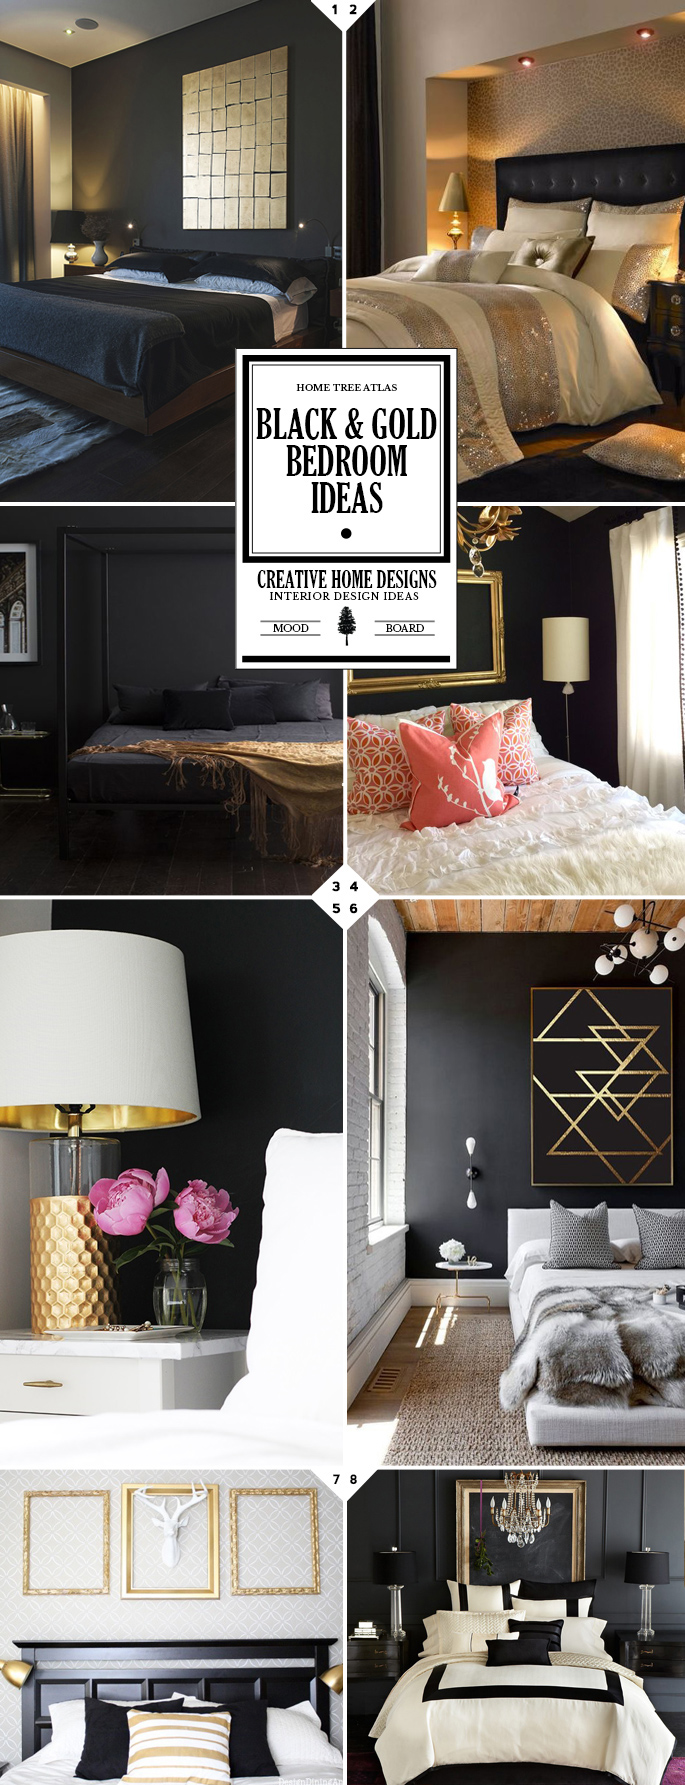 Style Guide: Black and Gold Bedroom Ideas